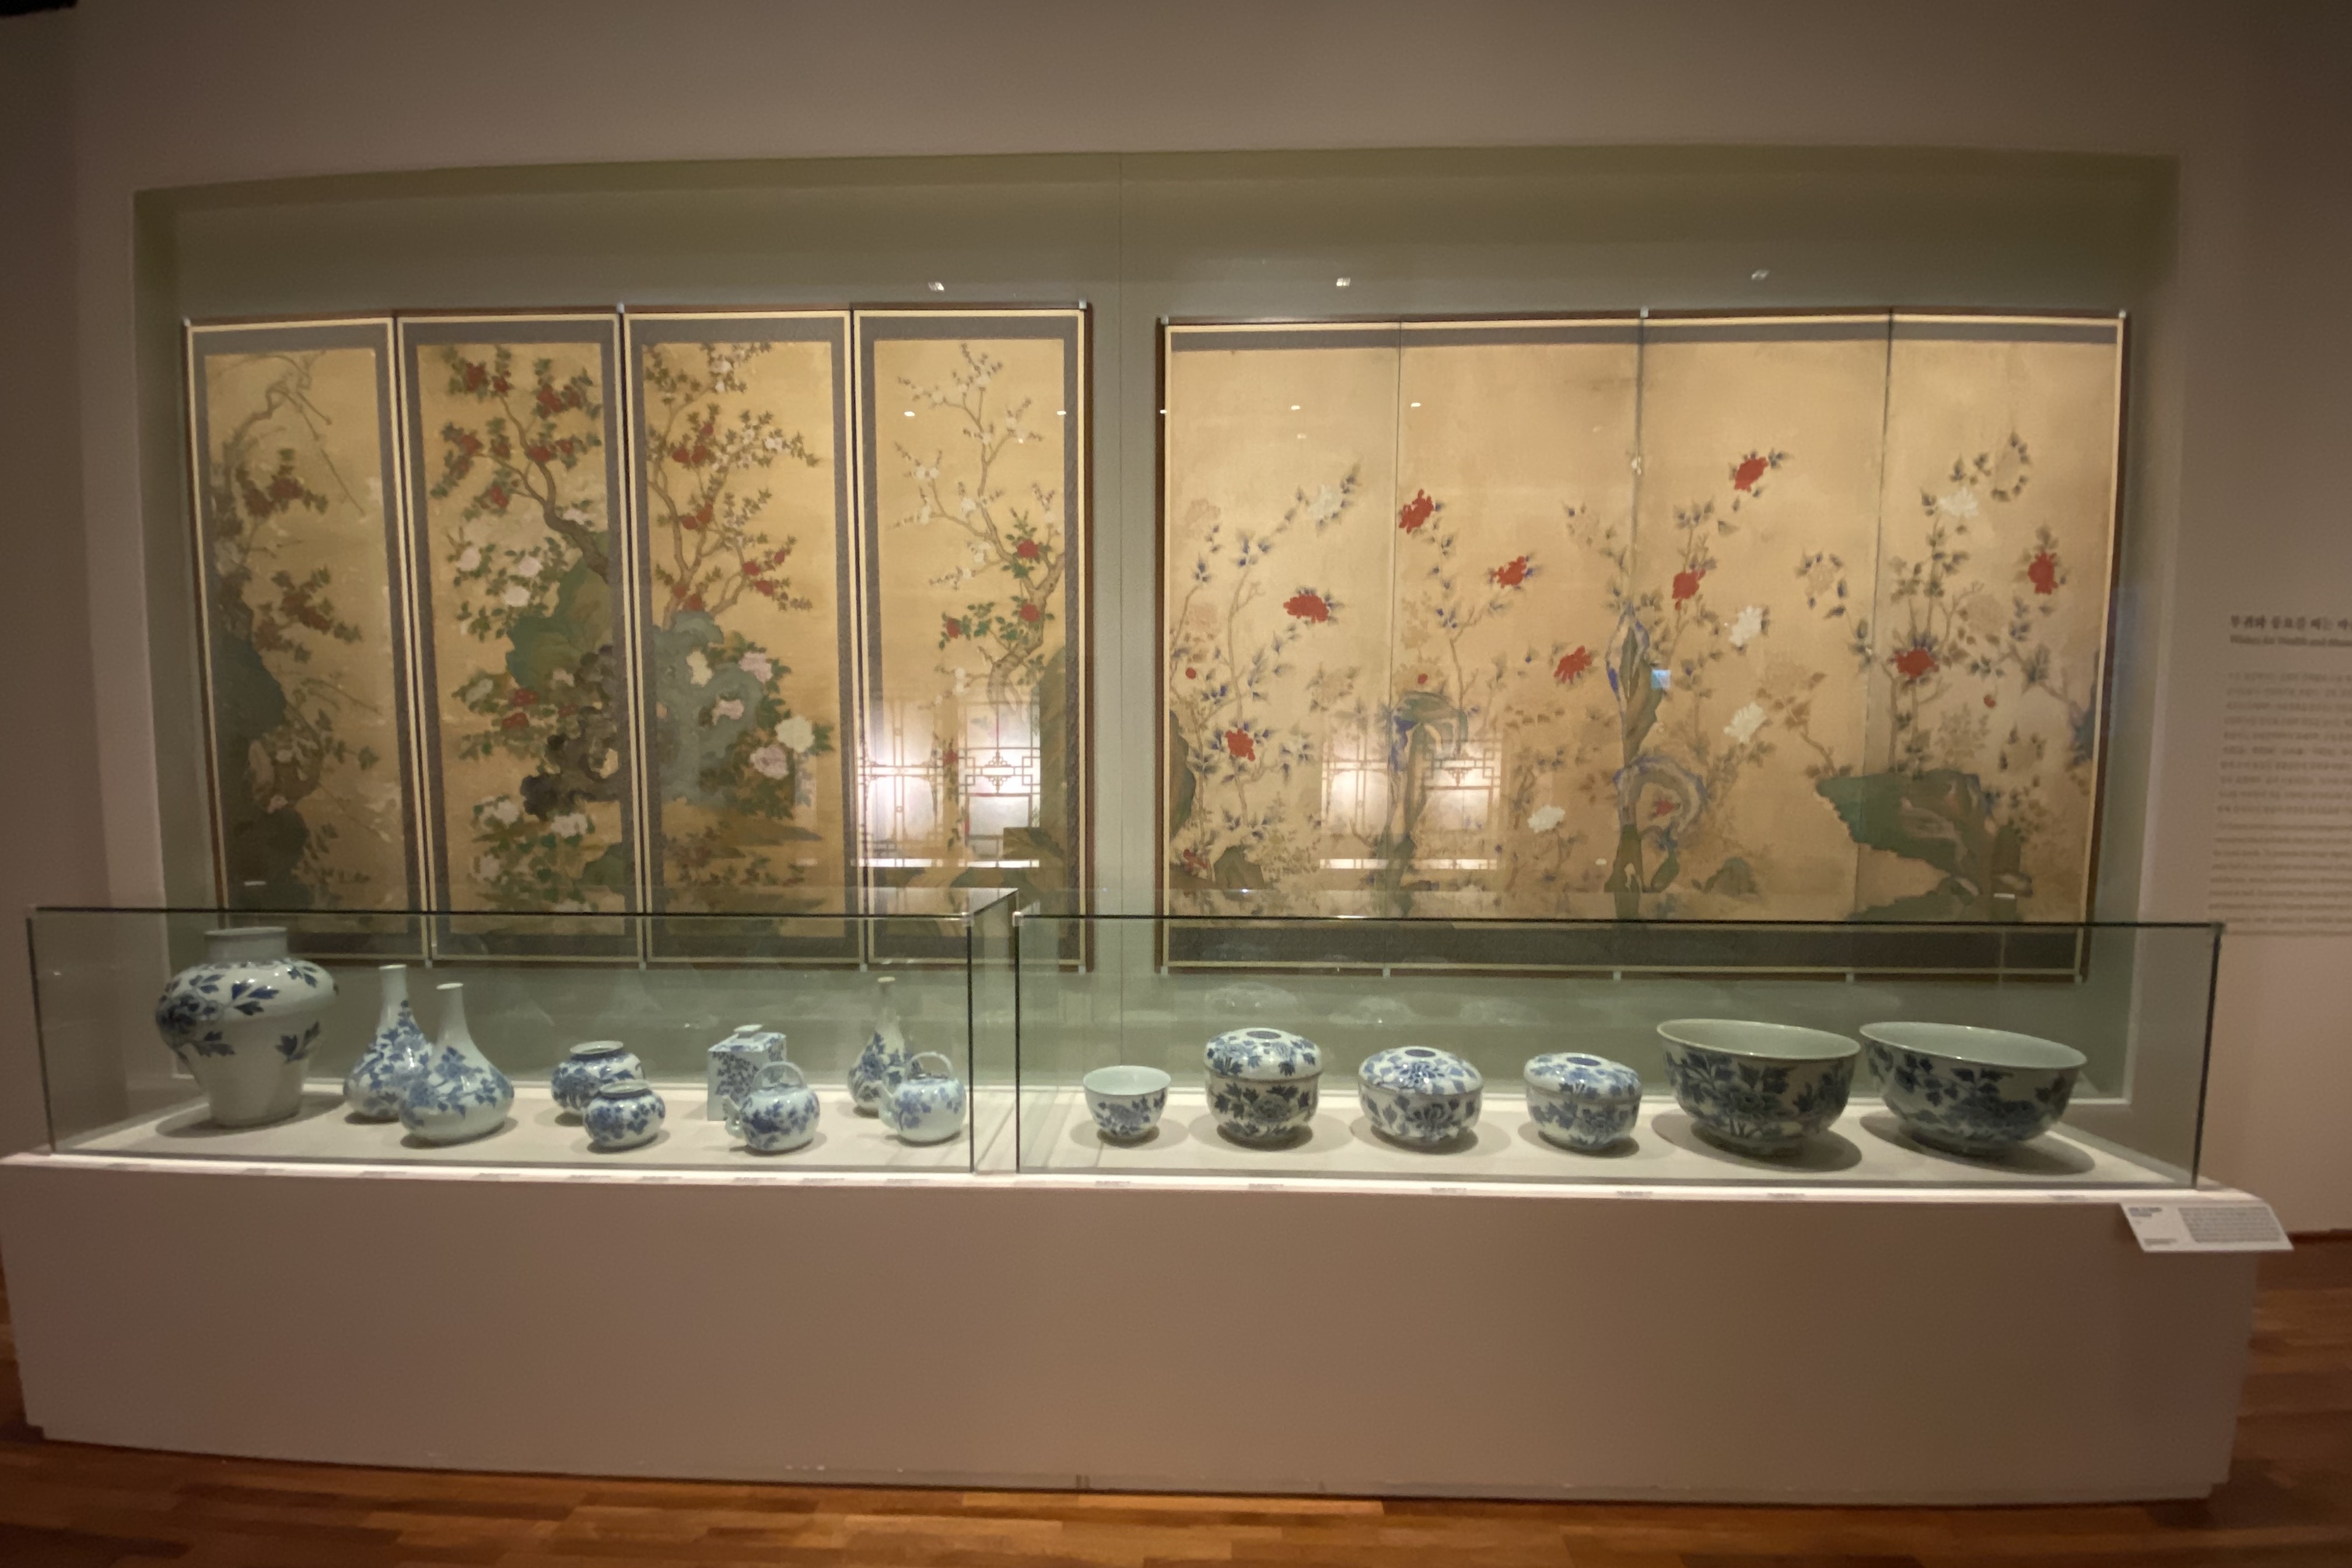 National Palace Museum of Korea1 : An exhibition hall with pottery displayed on a glass display stand in front of a folding screen with flower paintings
